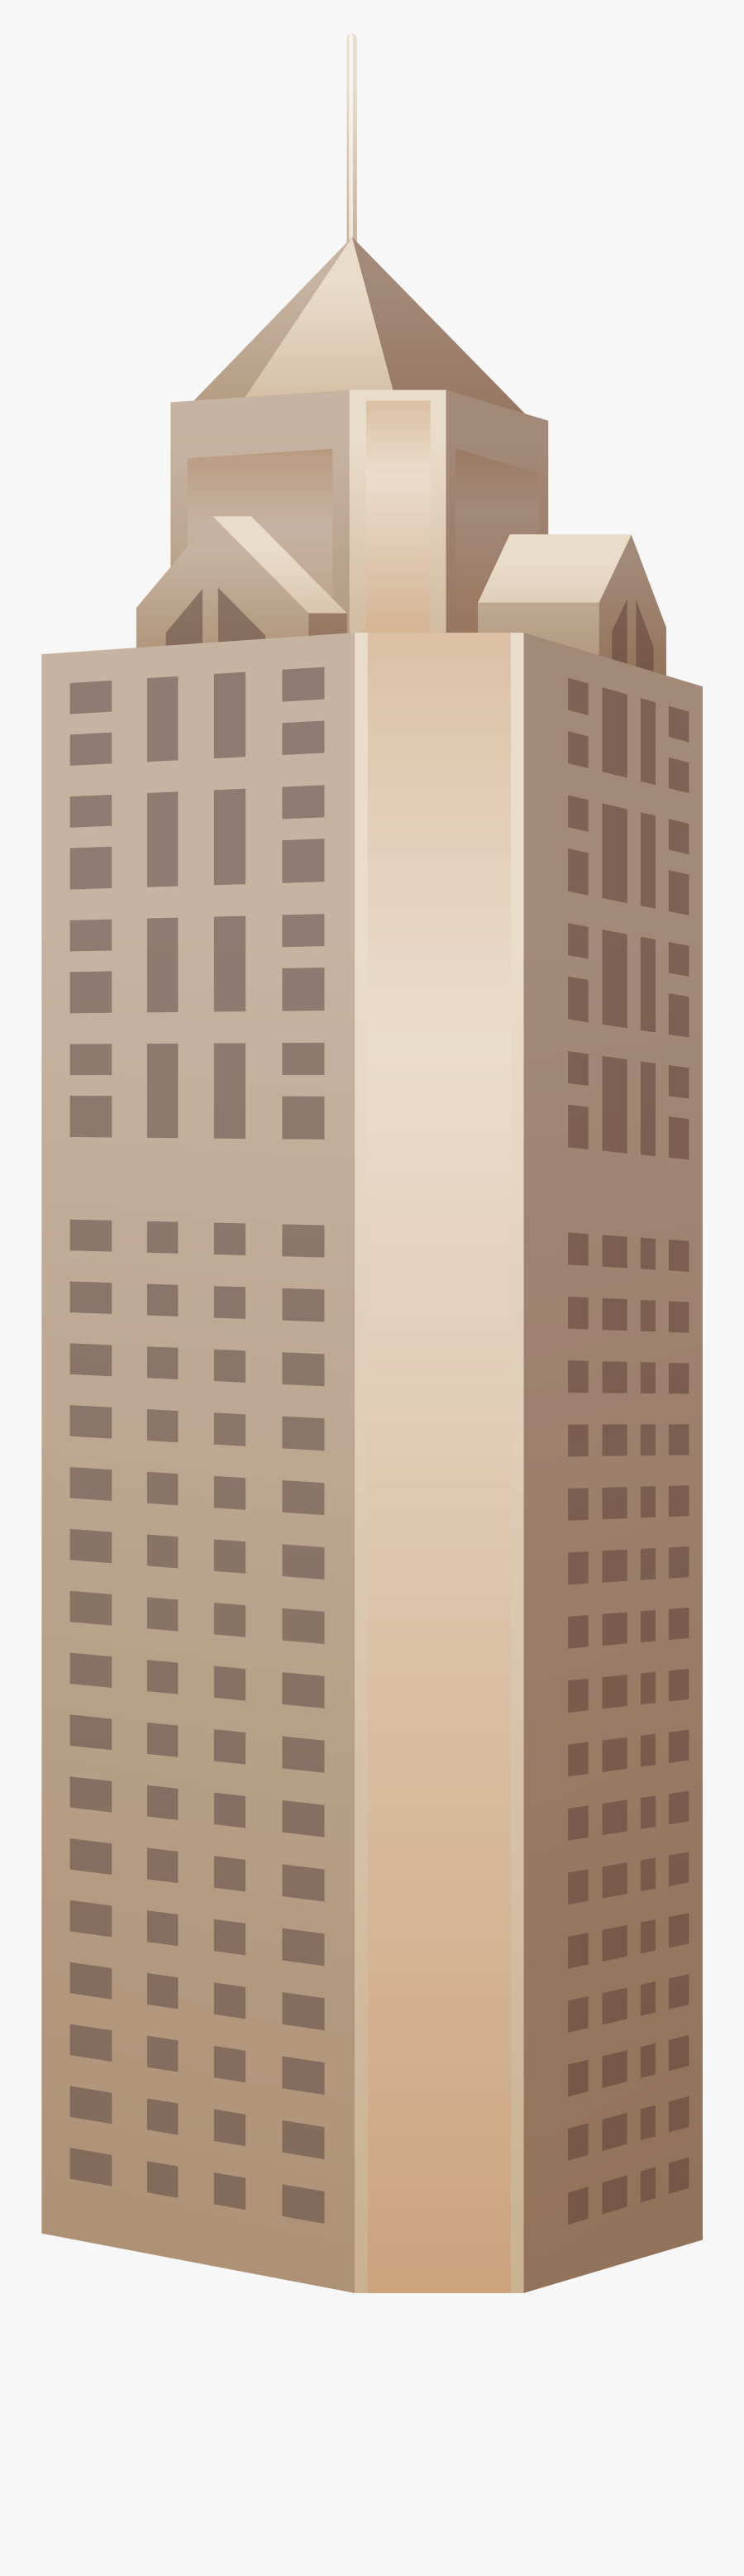 Old Brown Skyscraper Png Clipart - Tower Block, Transparent Clipart